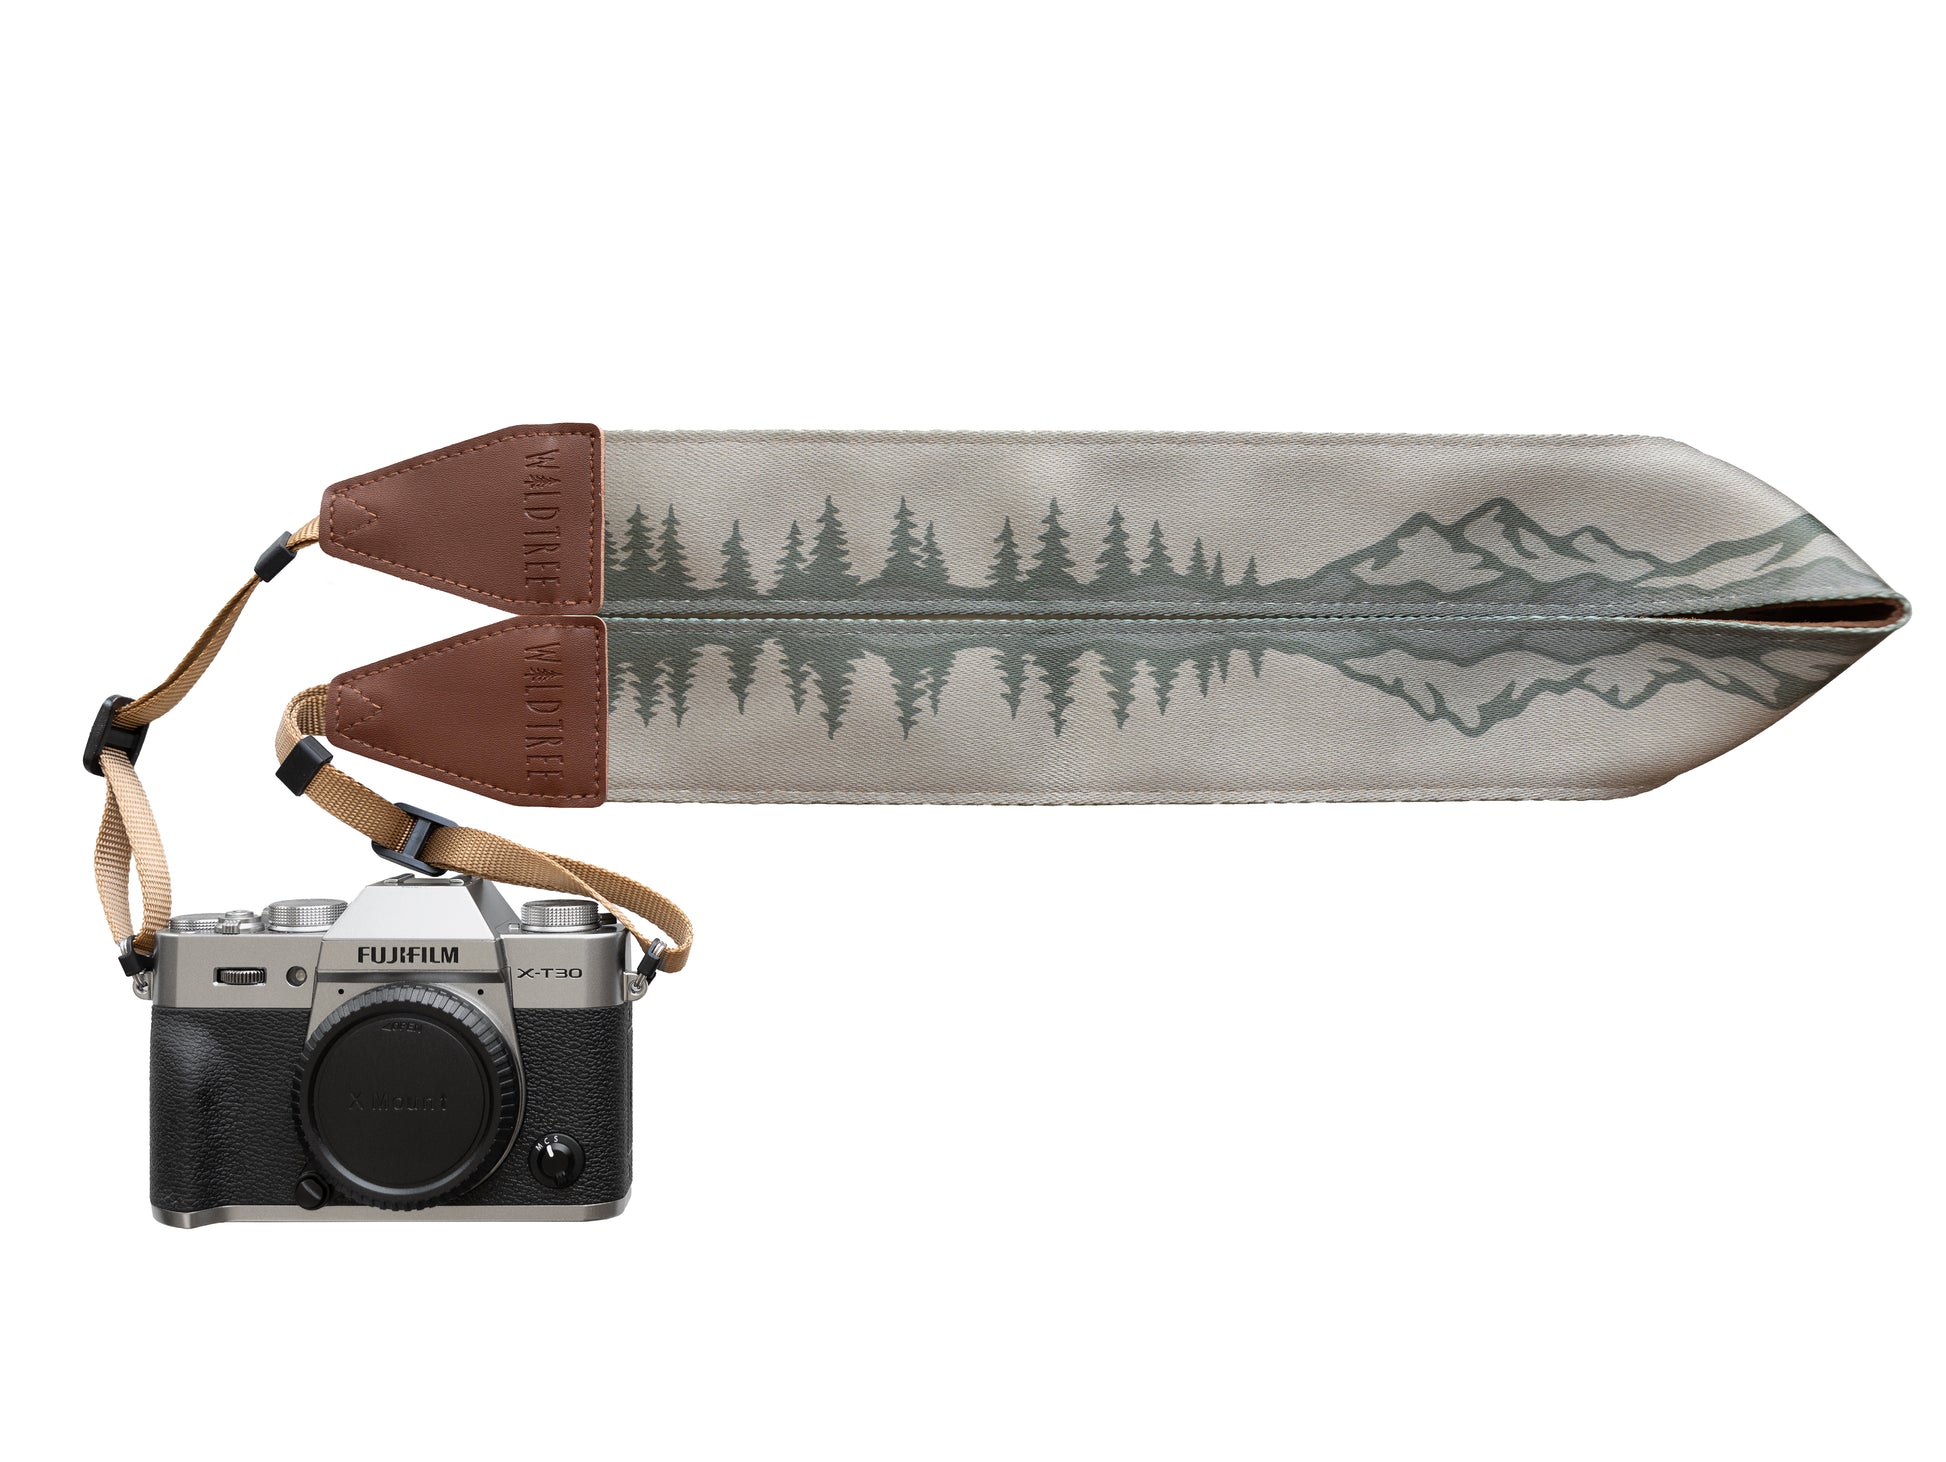 Wildtree camera strap printed with trees and mountains